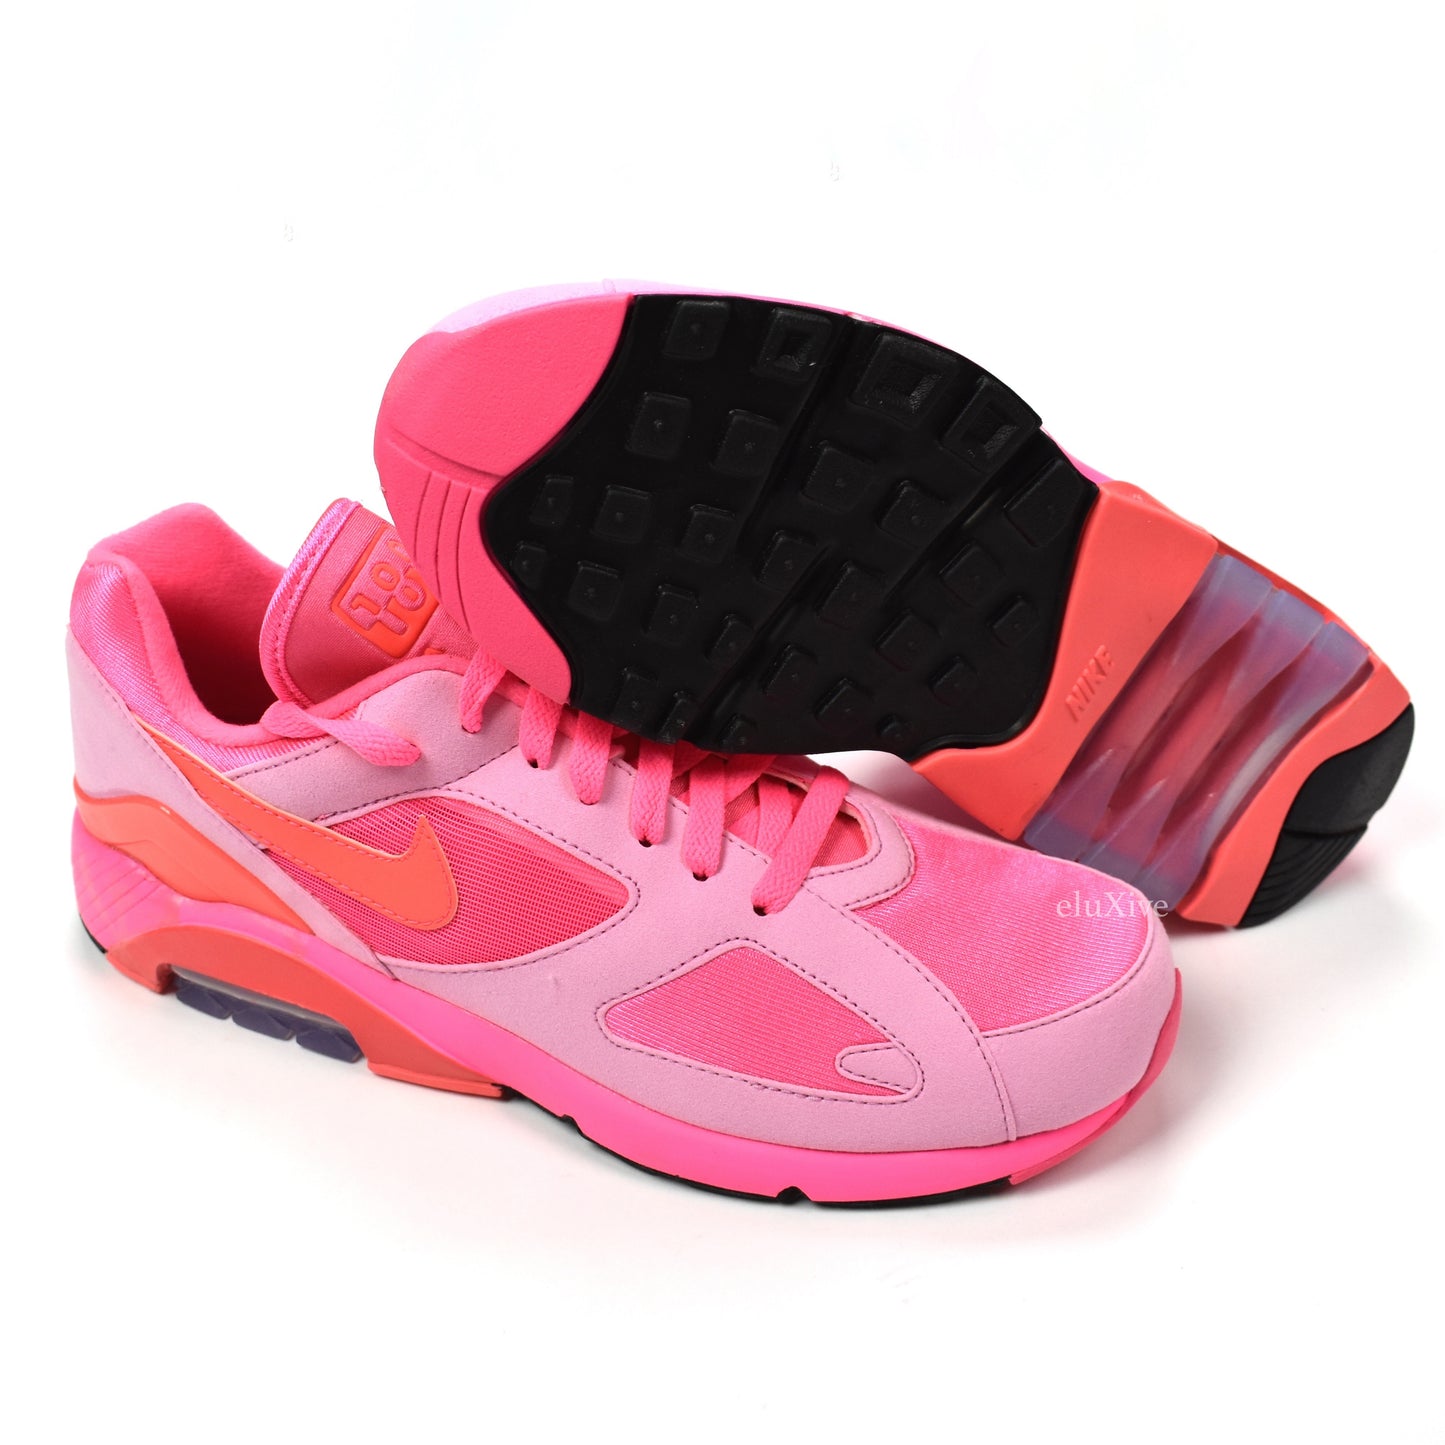 Comme des Garcons x Nike - Air Max 180 CDG (Pink)